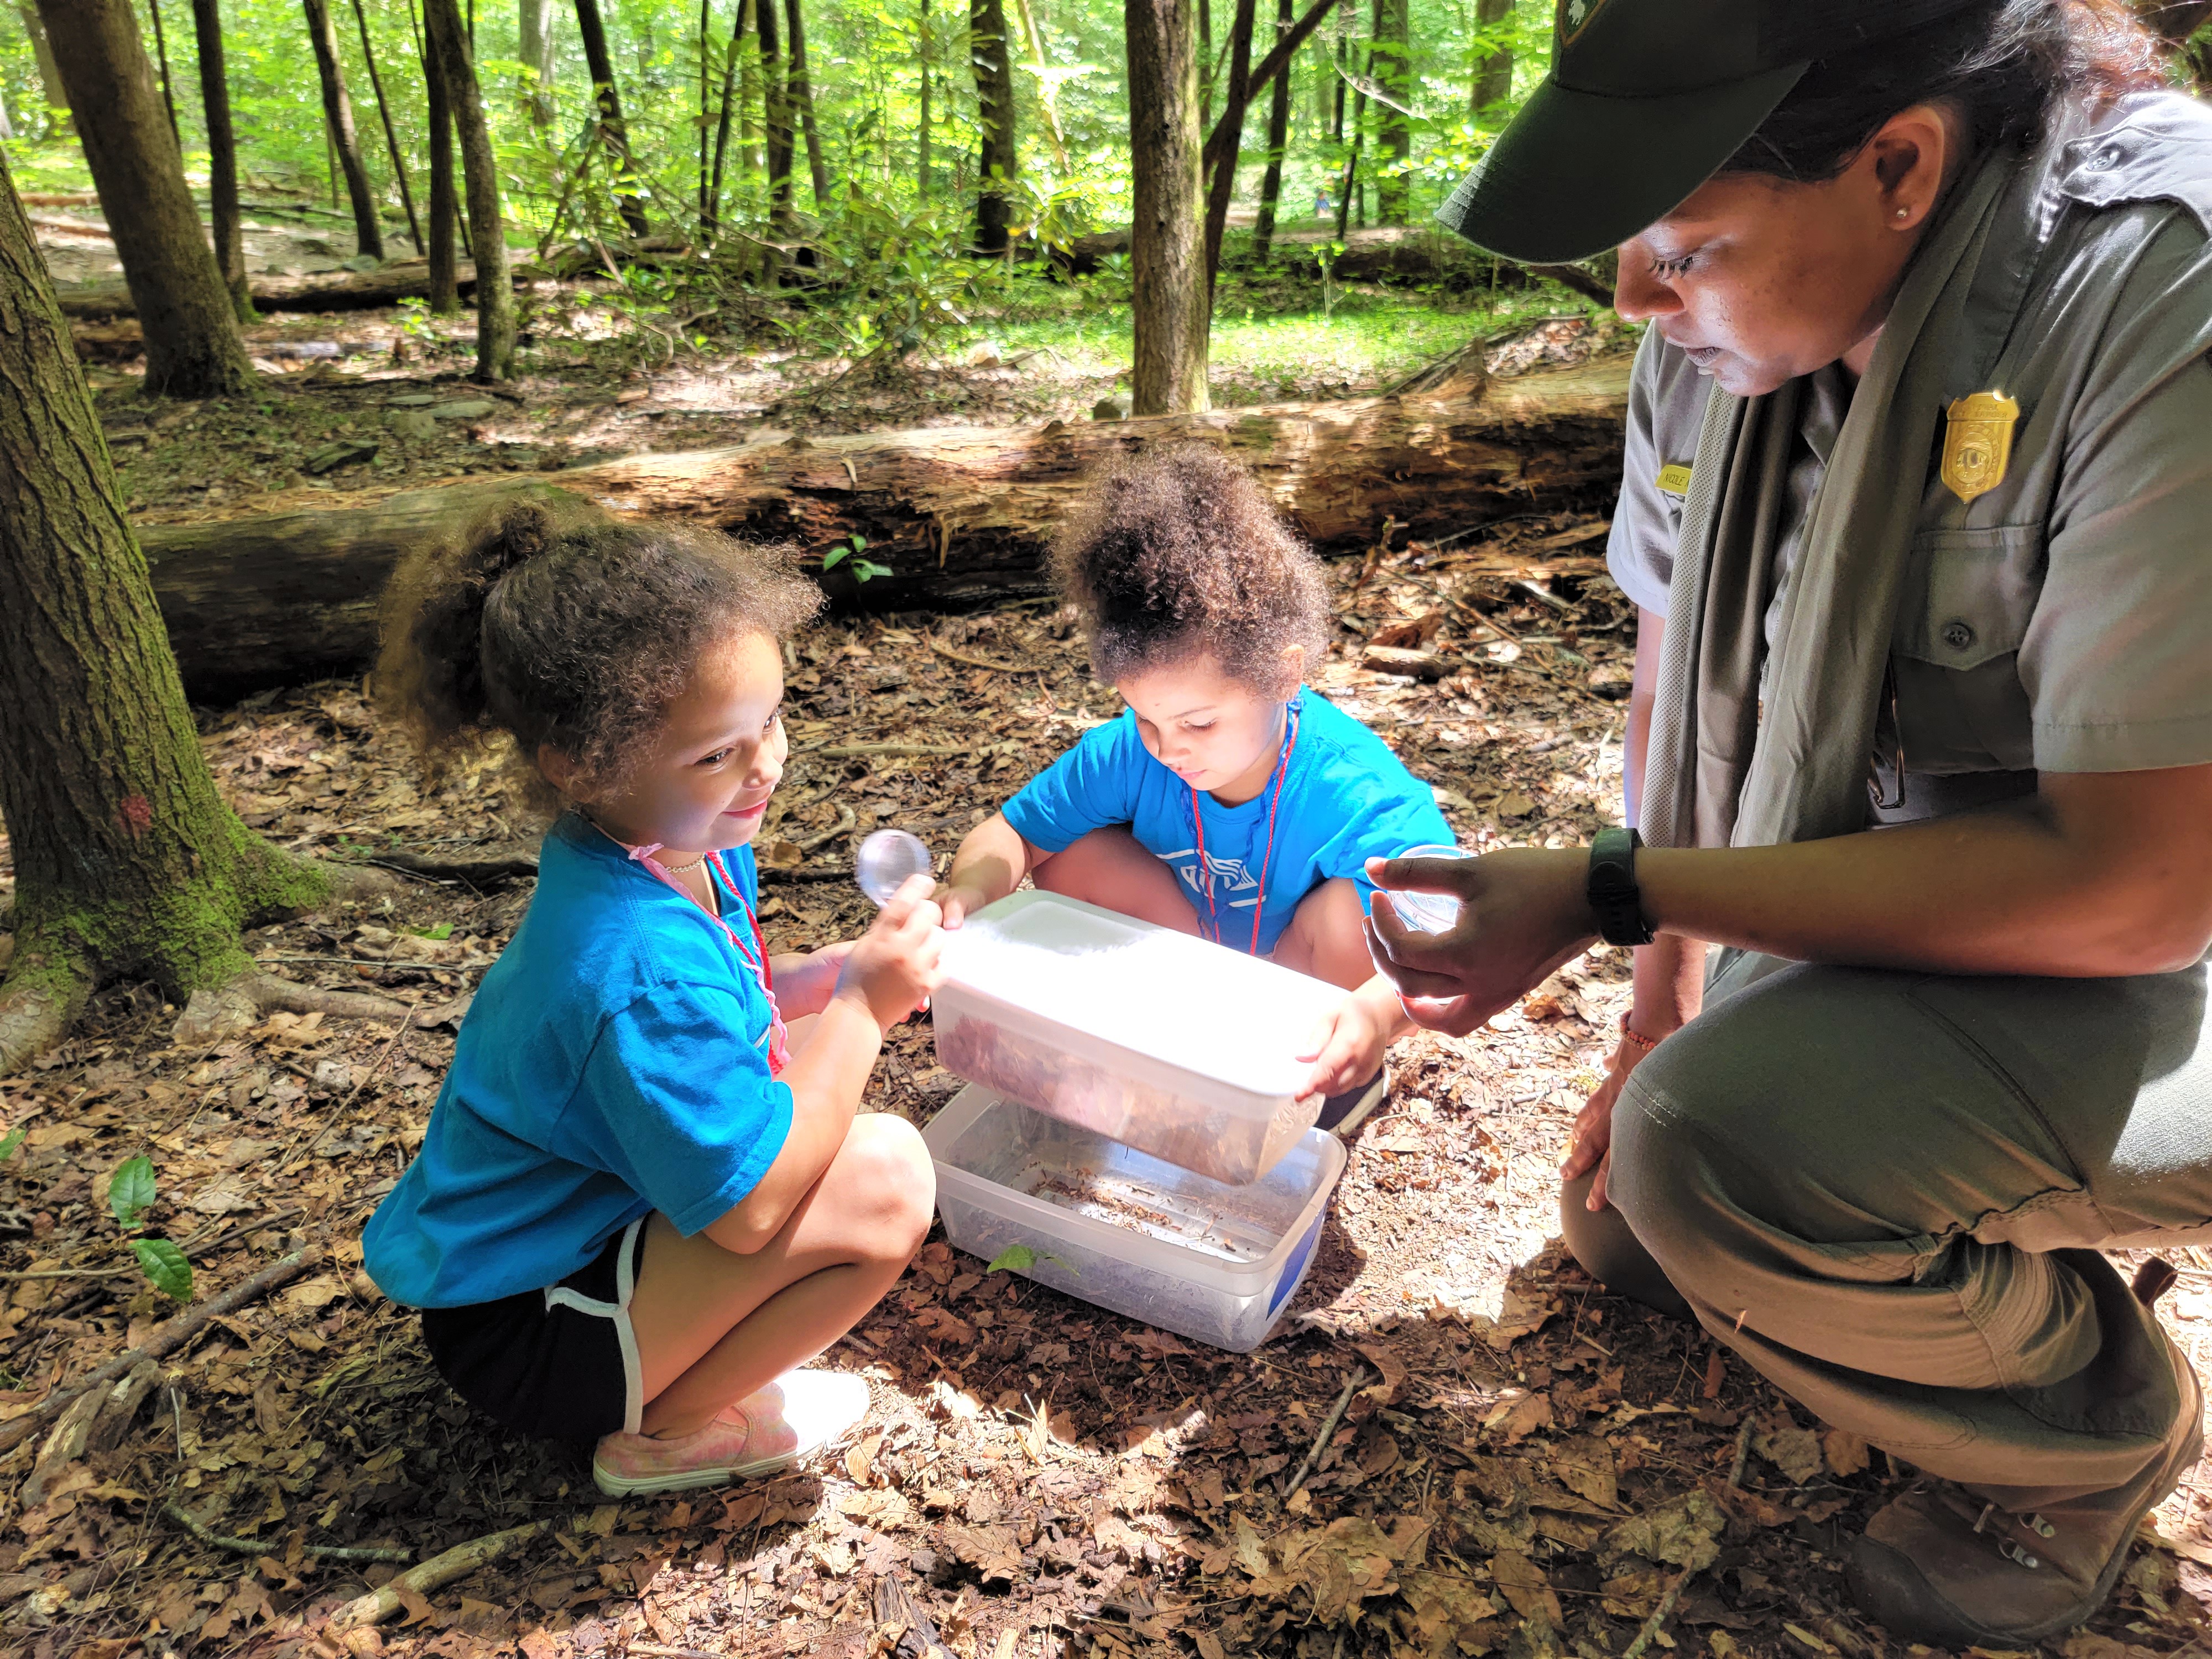 Nicole Nadasen, Park Ranger (Education) at Great Smoky Mountains National Park, works with youth from the Boys & Girls Clubs of the Tennessee Valley summer program to sample soil macroinvertebrates.